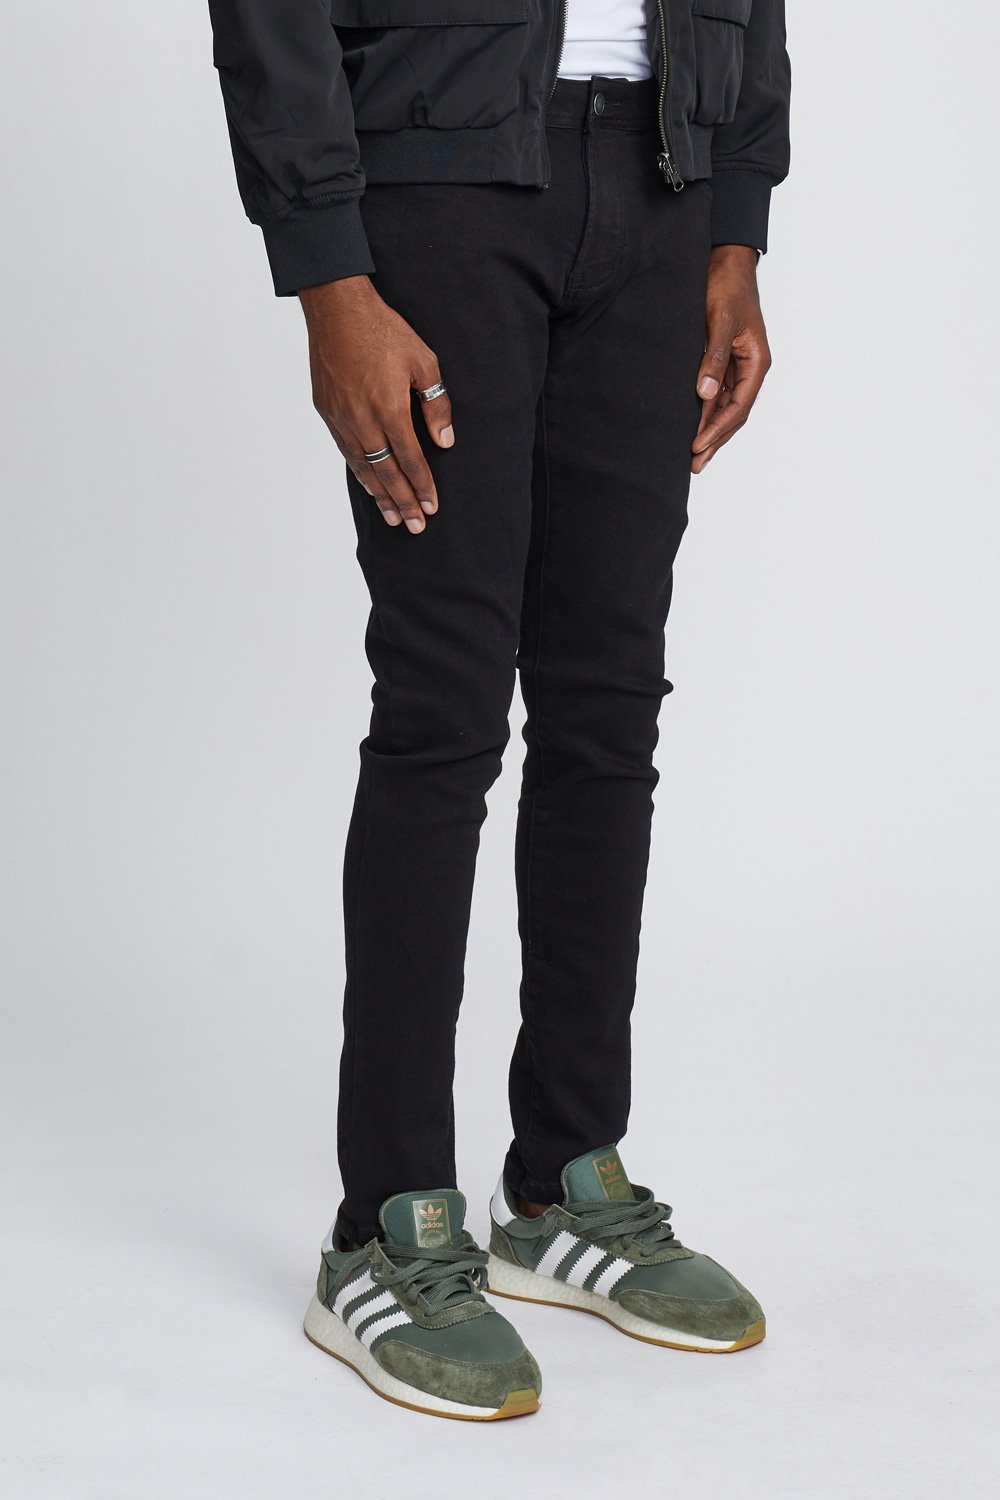 Buy Tapered Skinny Denim Jean Men's Jeans & Pants from Kuwalla. Find Kuwalla  fashion & more at